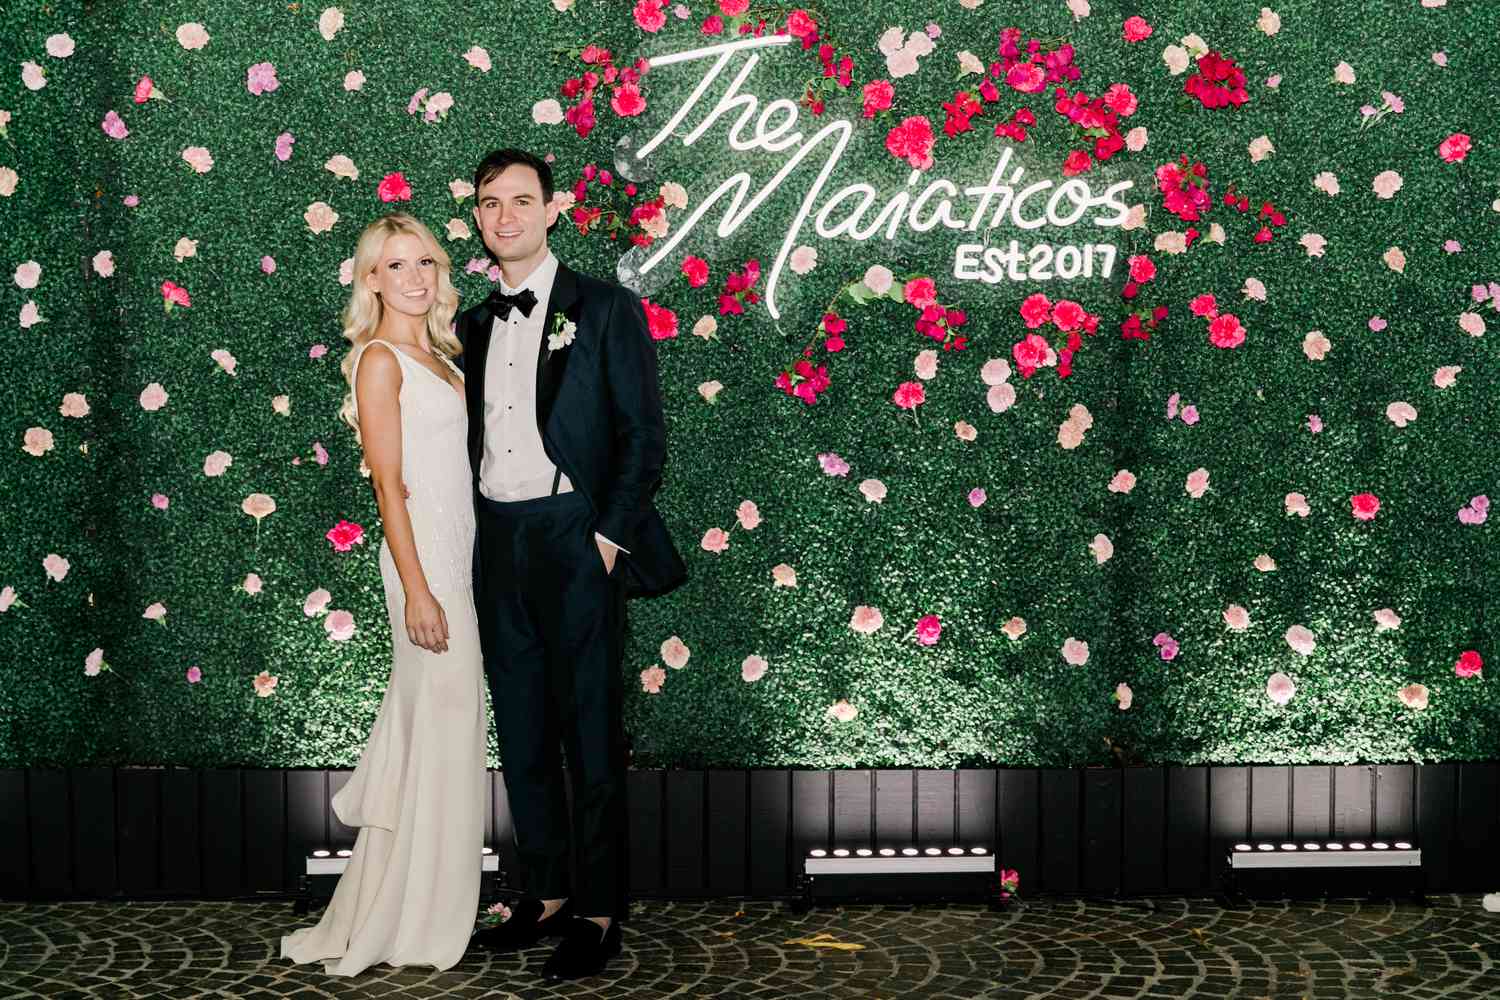 Benefits of Using a Wedding Neon Sign Backdrop